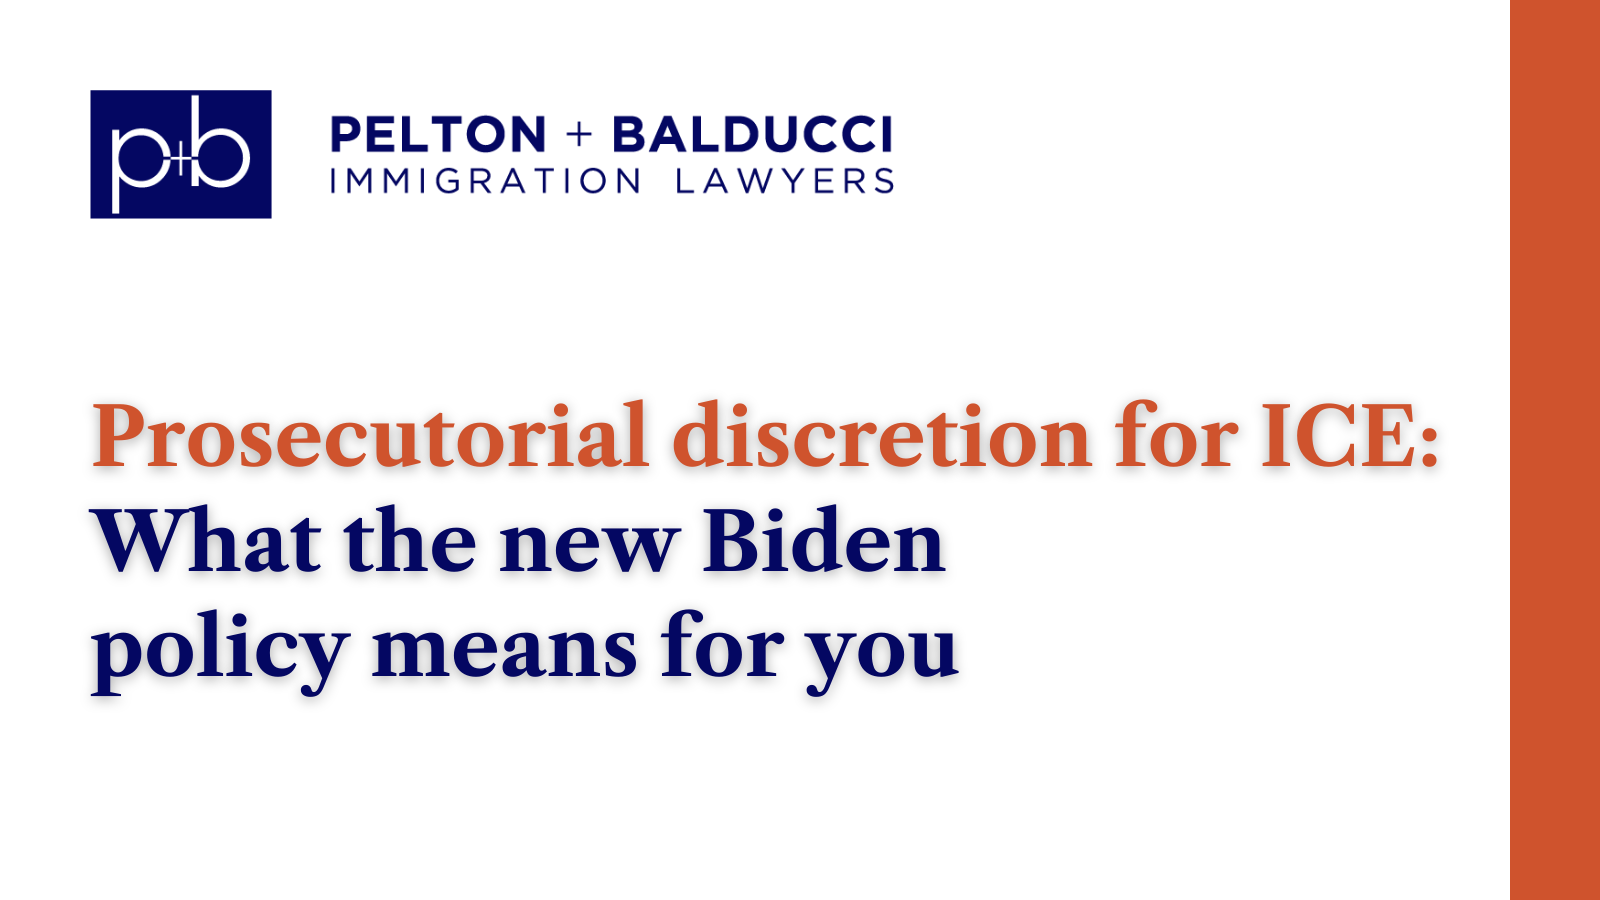 Prosecutorial discretion for ICE new Biden policy - New Orleans Immigration Lawyers - Pelton Balducci